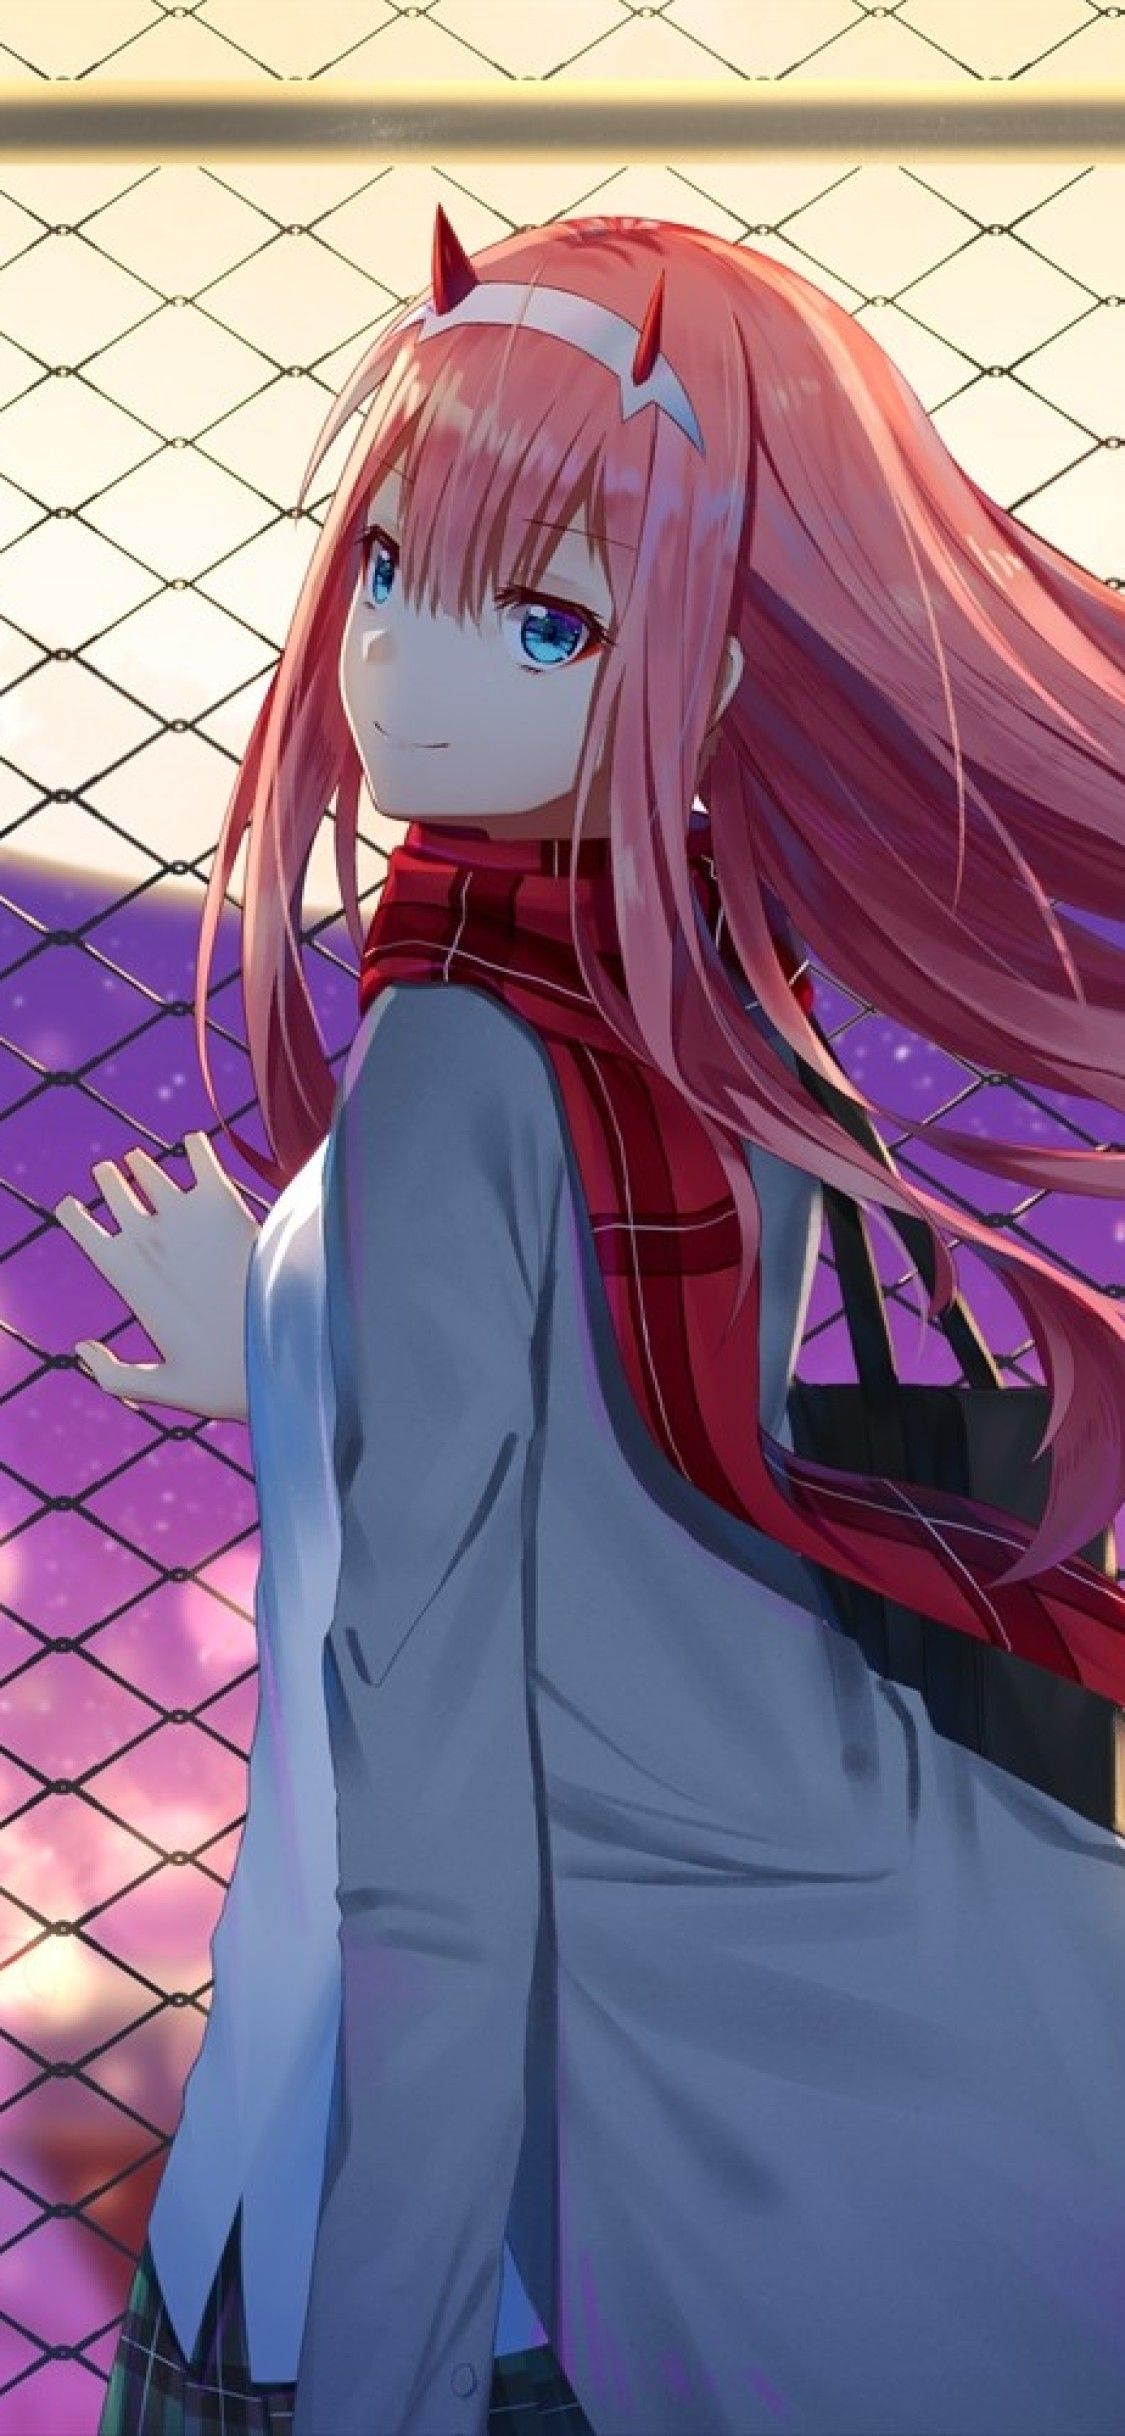 Zero Two Darling In The Franxx iPhone XS, iPhone 10